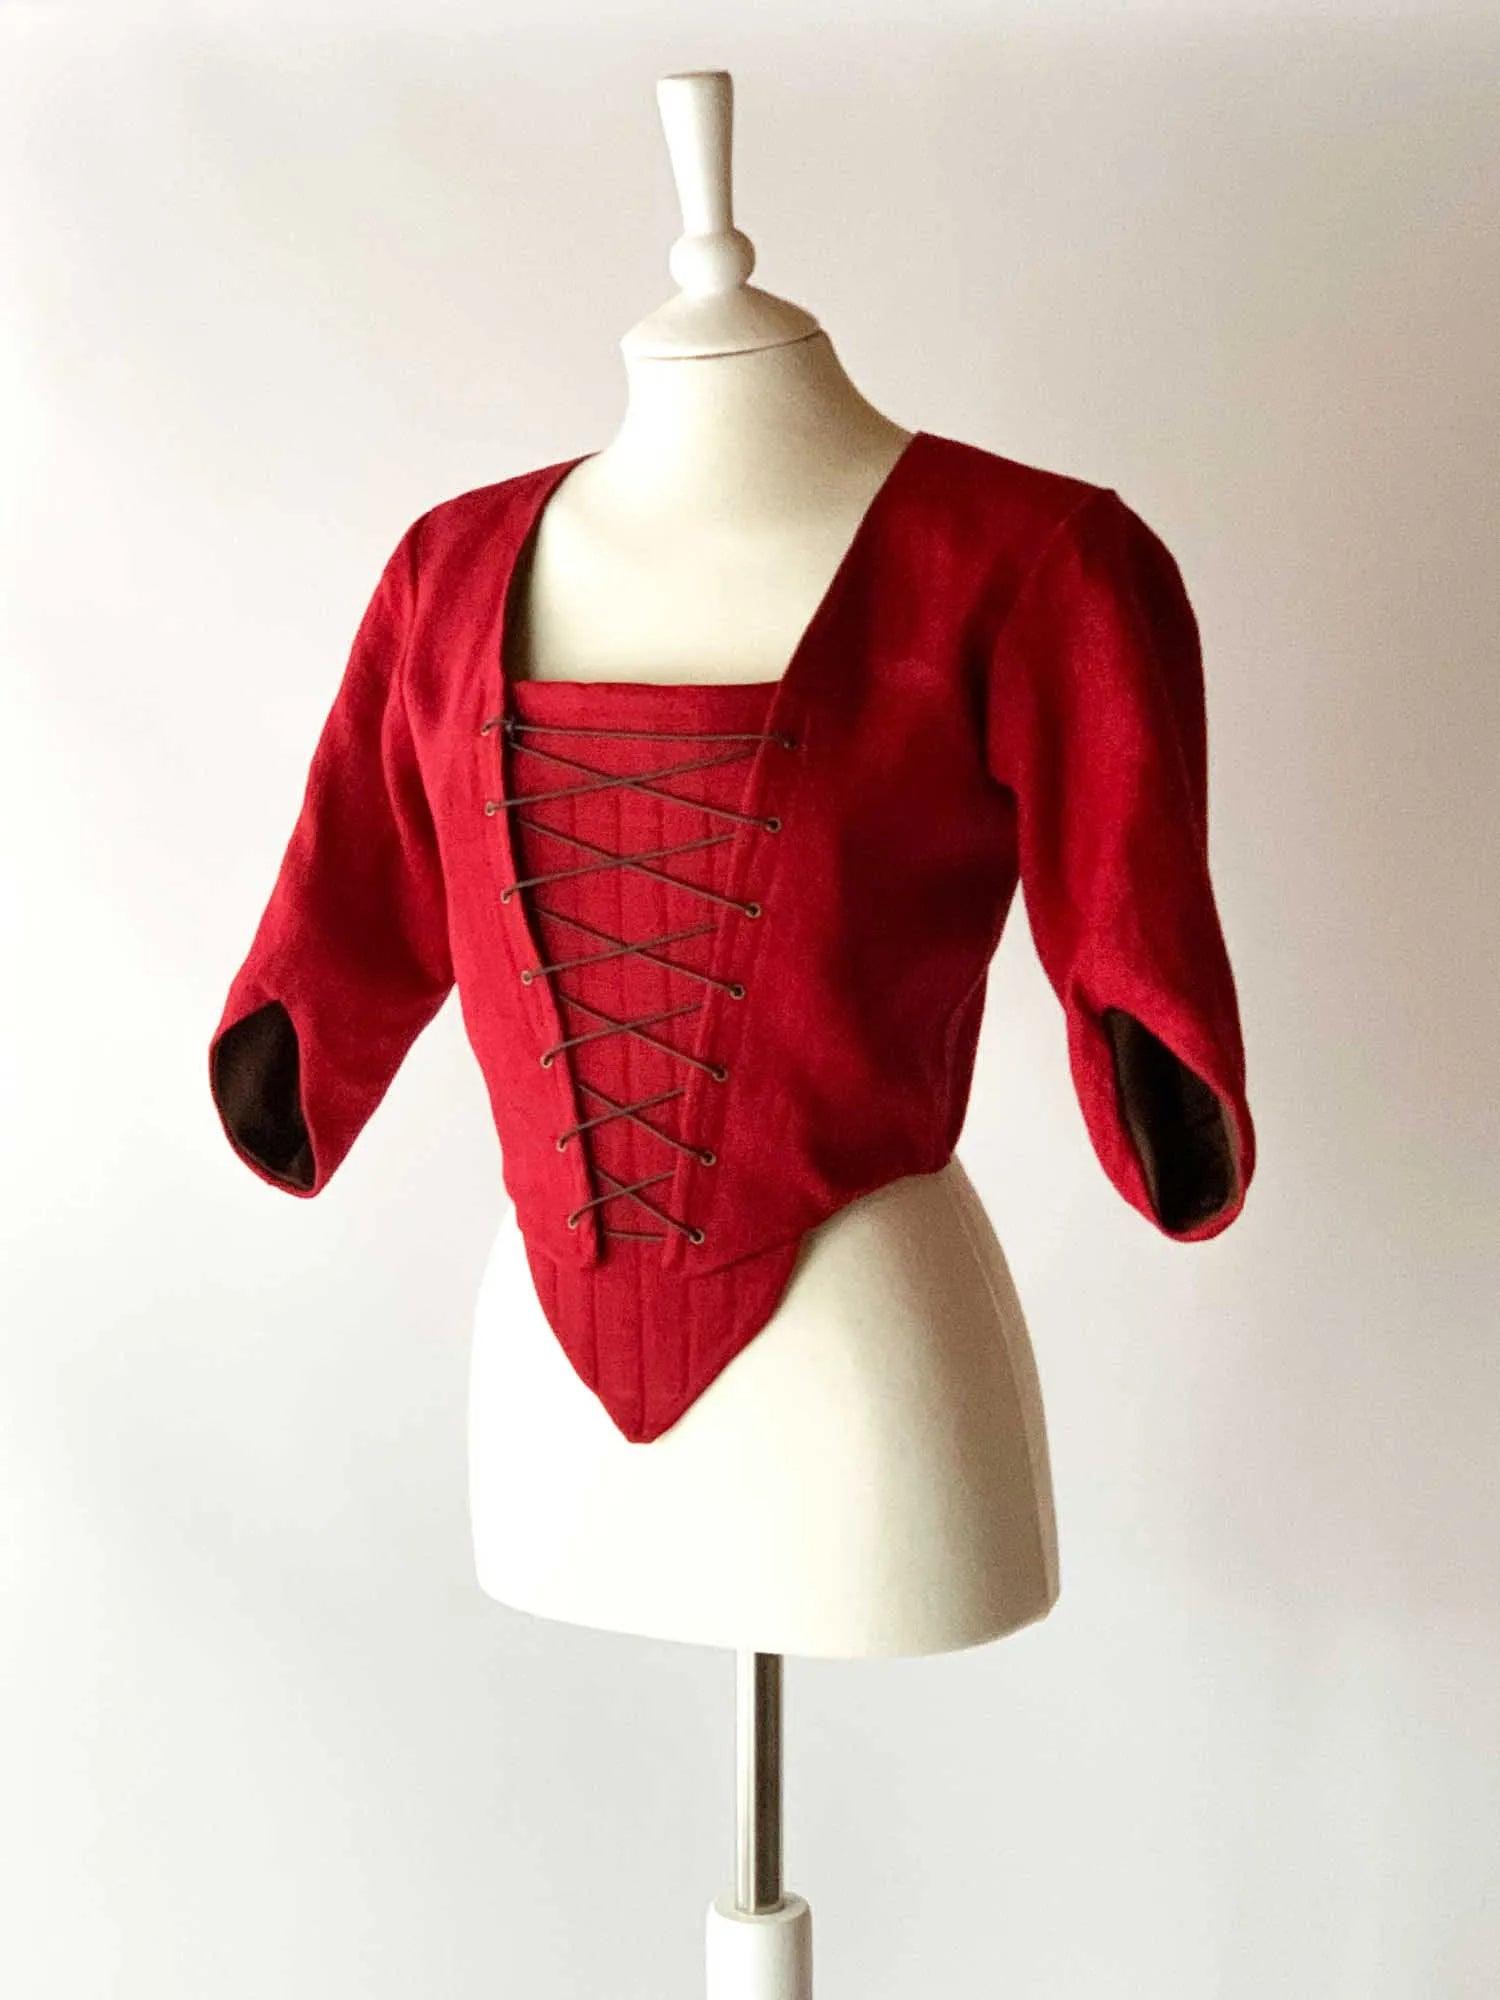 Lace-Up Bodice in Cherry Red Linen - Atelier Serraspina